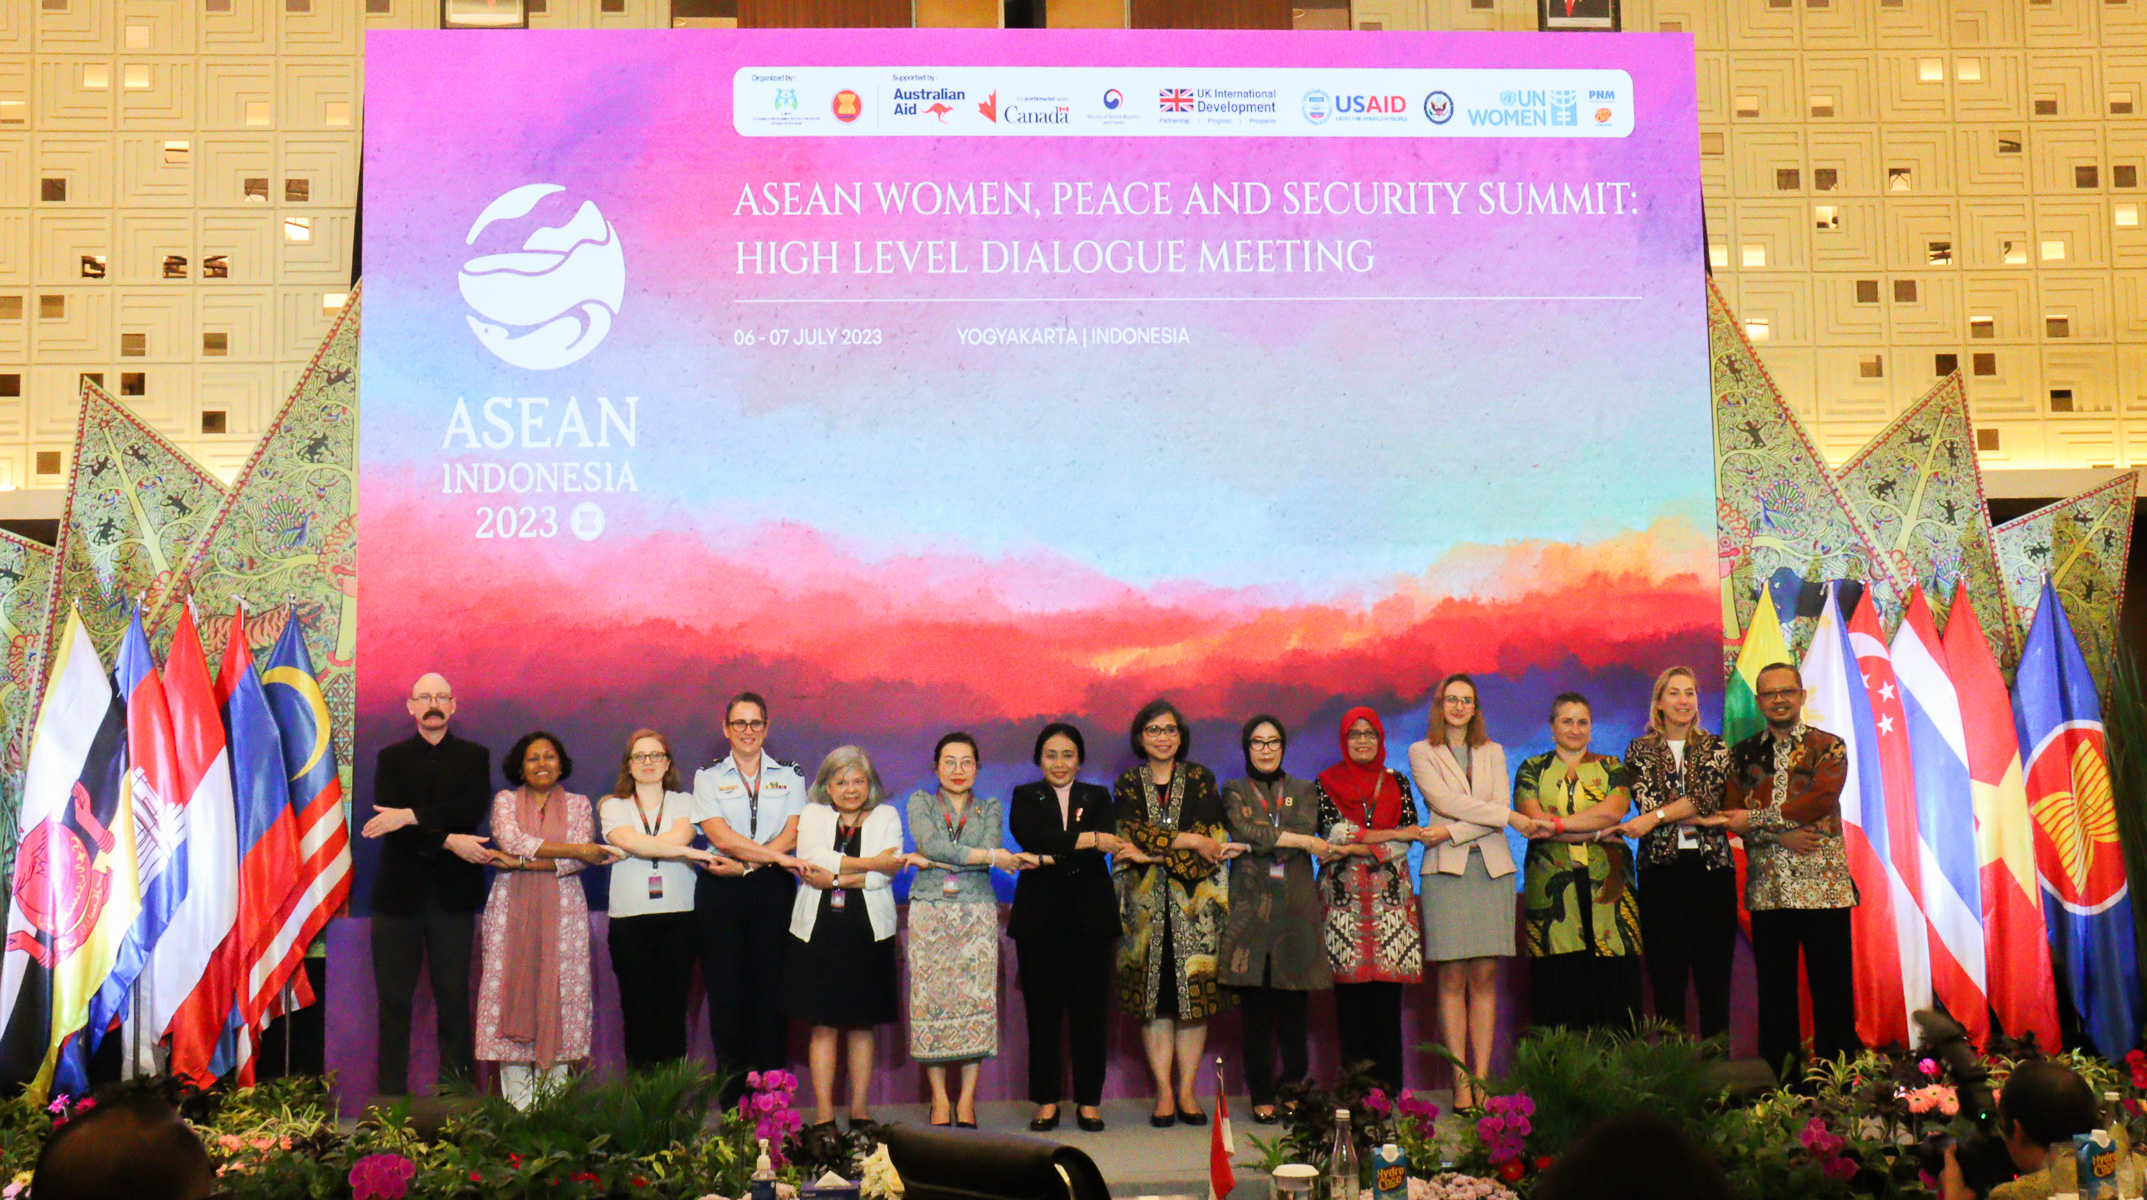 Representatives of Indonesia, ASEAN and development partners joined hands at the ASEAN WPS Summit organized on 6-7 July 2023 in Yogyakarta, Indonesia.